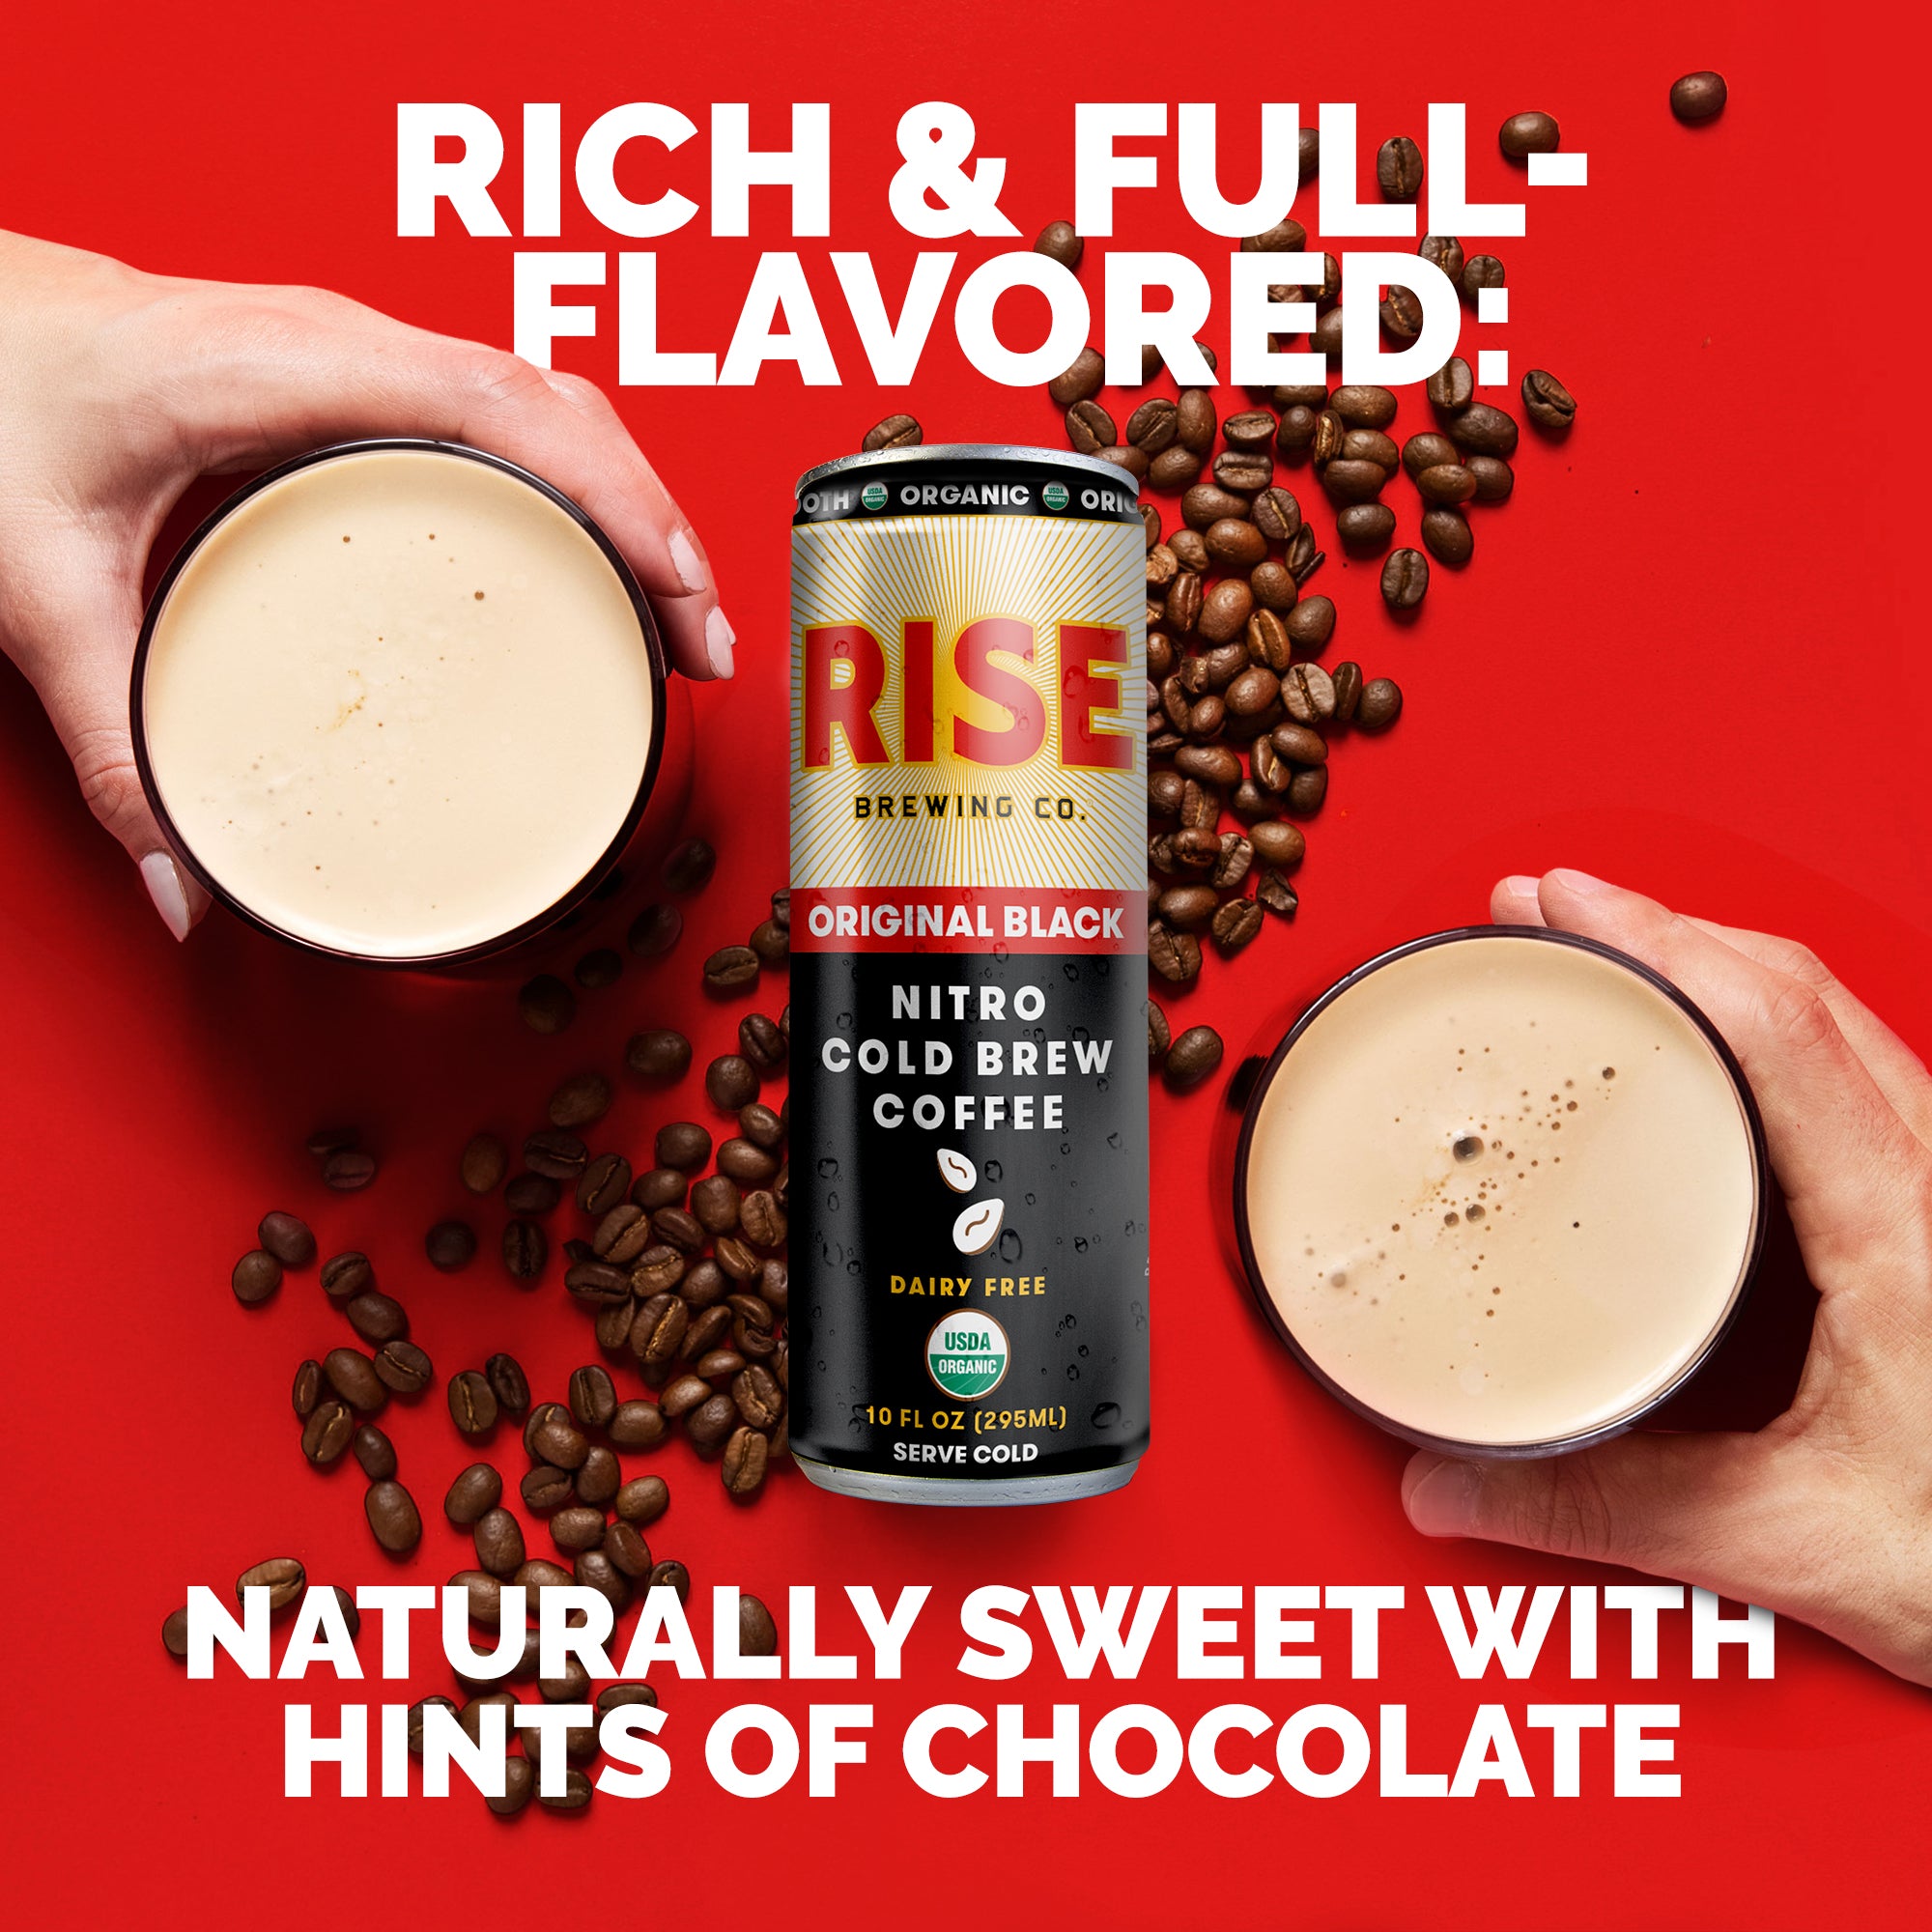 Rich and Full Flavored: Naturally Sweet with hints of chocolate. RISE Brewing Co. Nitro Cold Brew Original Black.